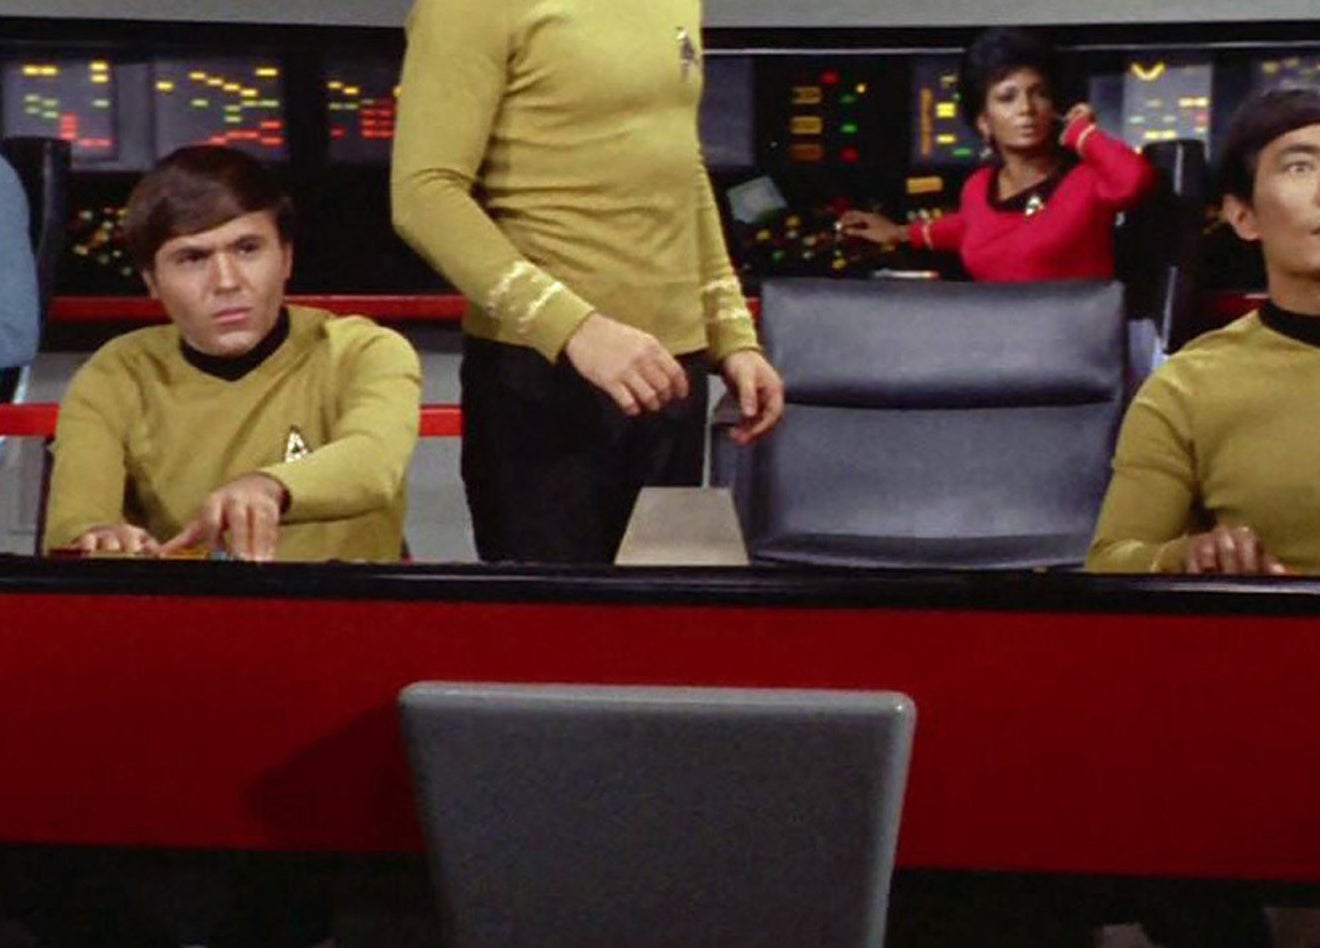 Captain Kirk and Sulu star out the front of the ship